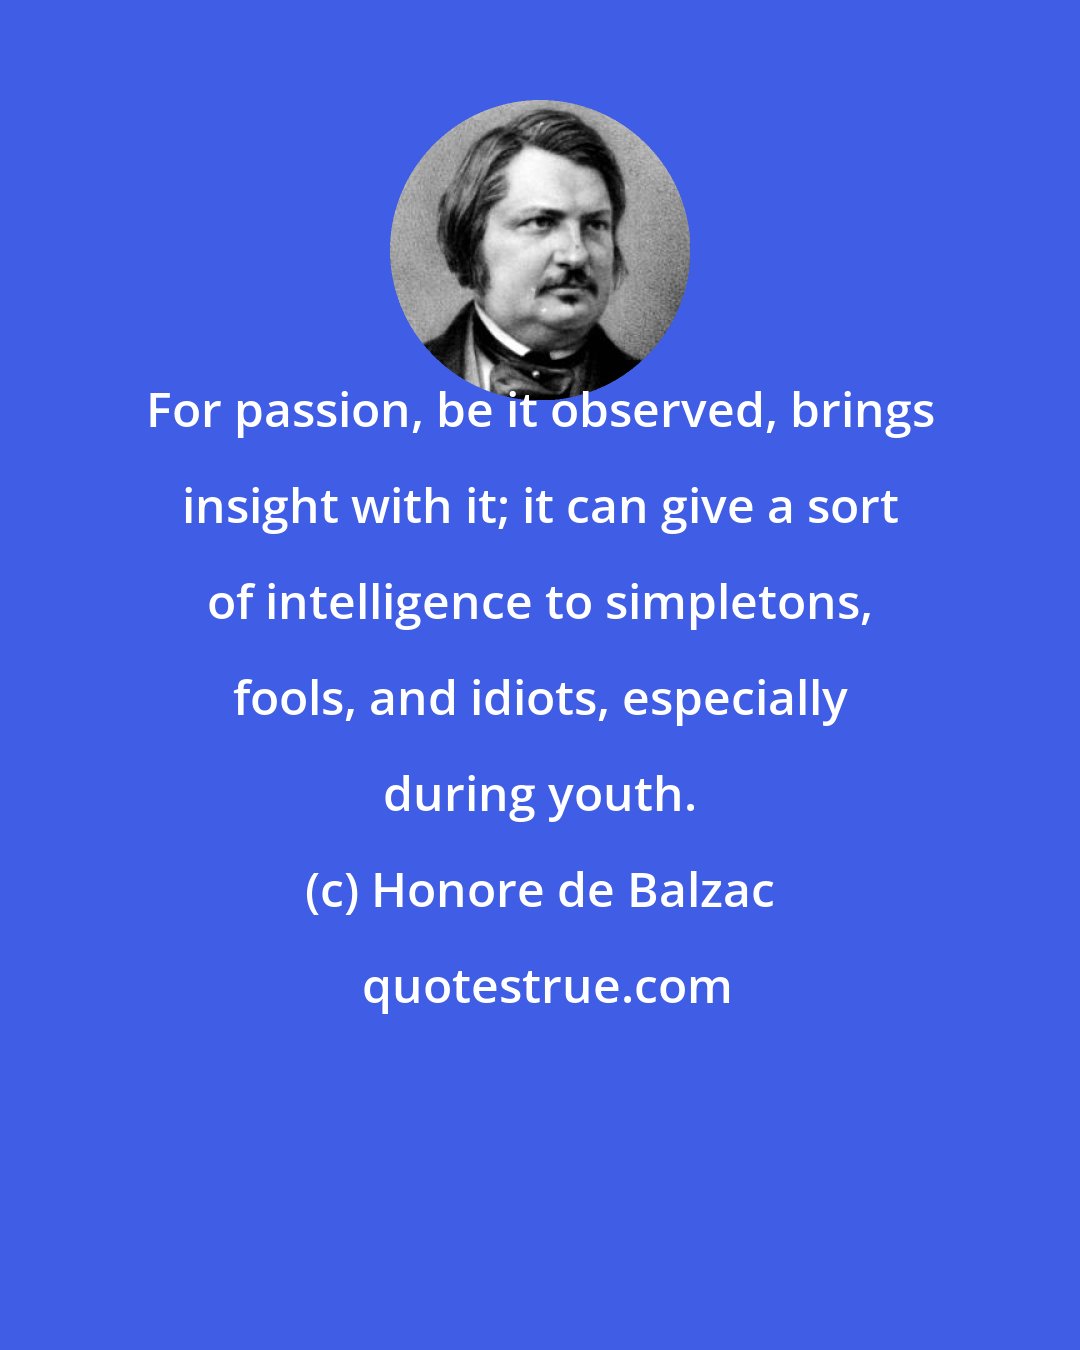 Honore de Balzac: For passion, be it observed, brings insight with it; it can give a sort of intelligence to simpletons, fools, and idiots, especially during youth.